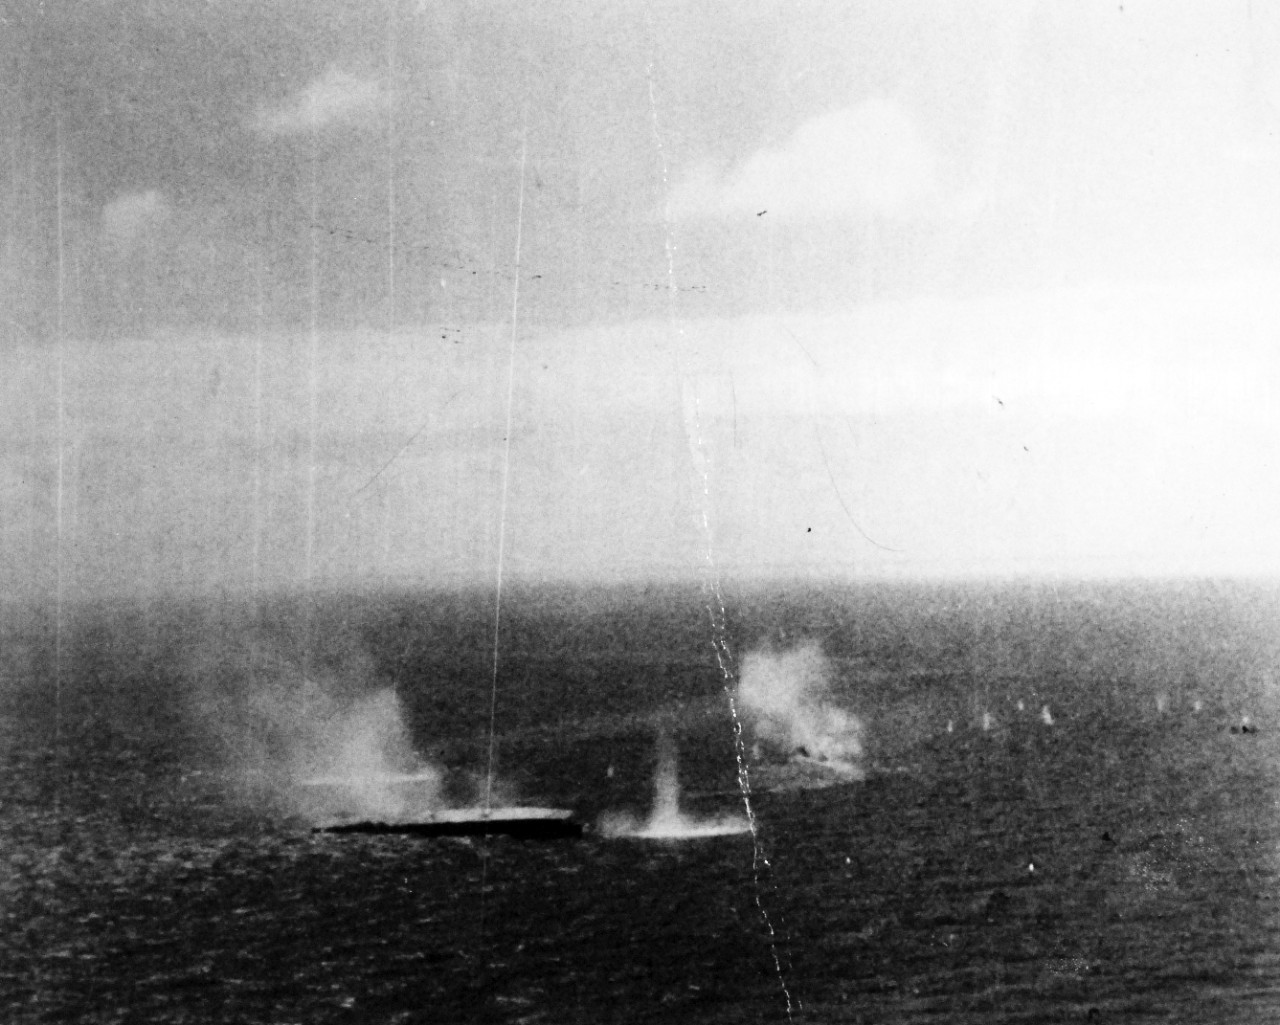 80-G-272553:   Battle of the Sibuyan Sea, October 24, 1944.  Japanese warships under attack by carrier-based planes.  Note the light aircraft carrier, Zuiho, listing in the water.   Taken from by a plane from USS Franklin (CV-13).   Official U.S. Navy Photograph, now in the collections of the National Archives.   (2014/5/15).